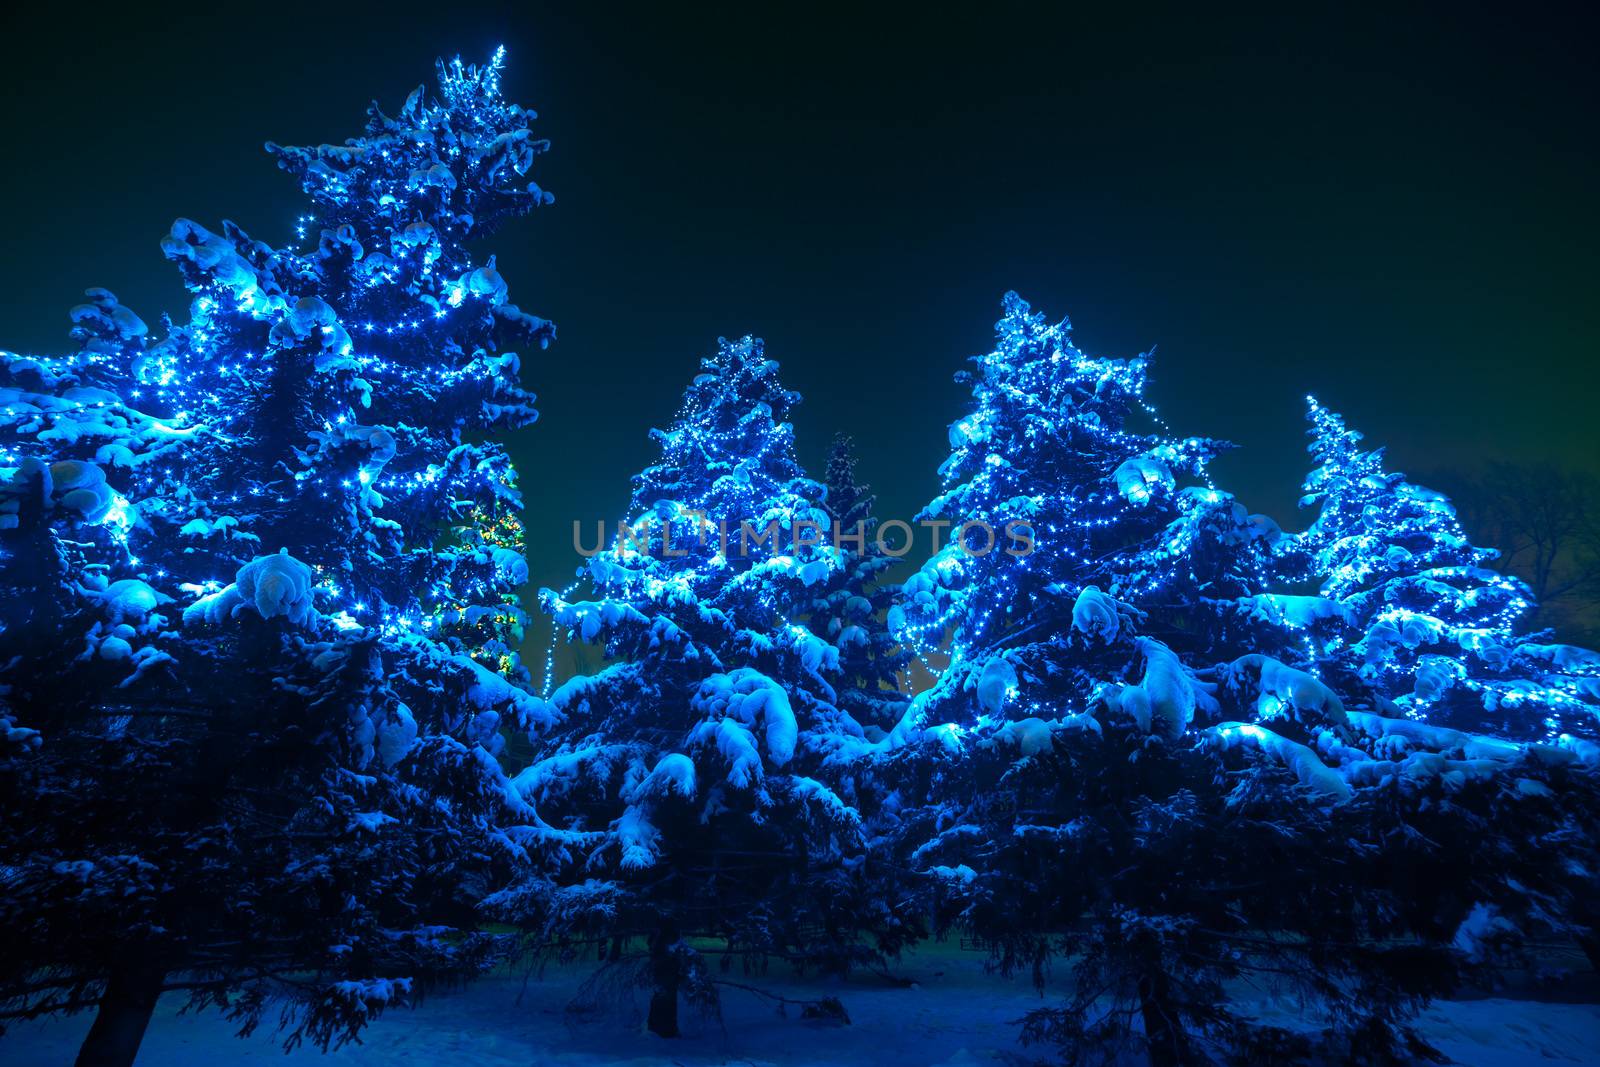 Snow covered Christmas tree lights in a winter wonderland forest by night. by Maynagashev